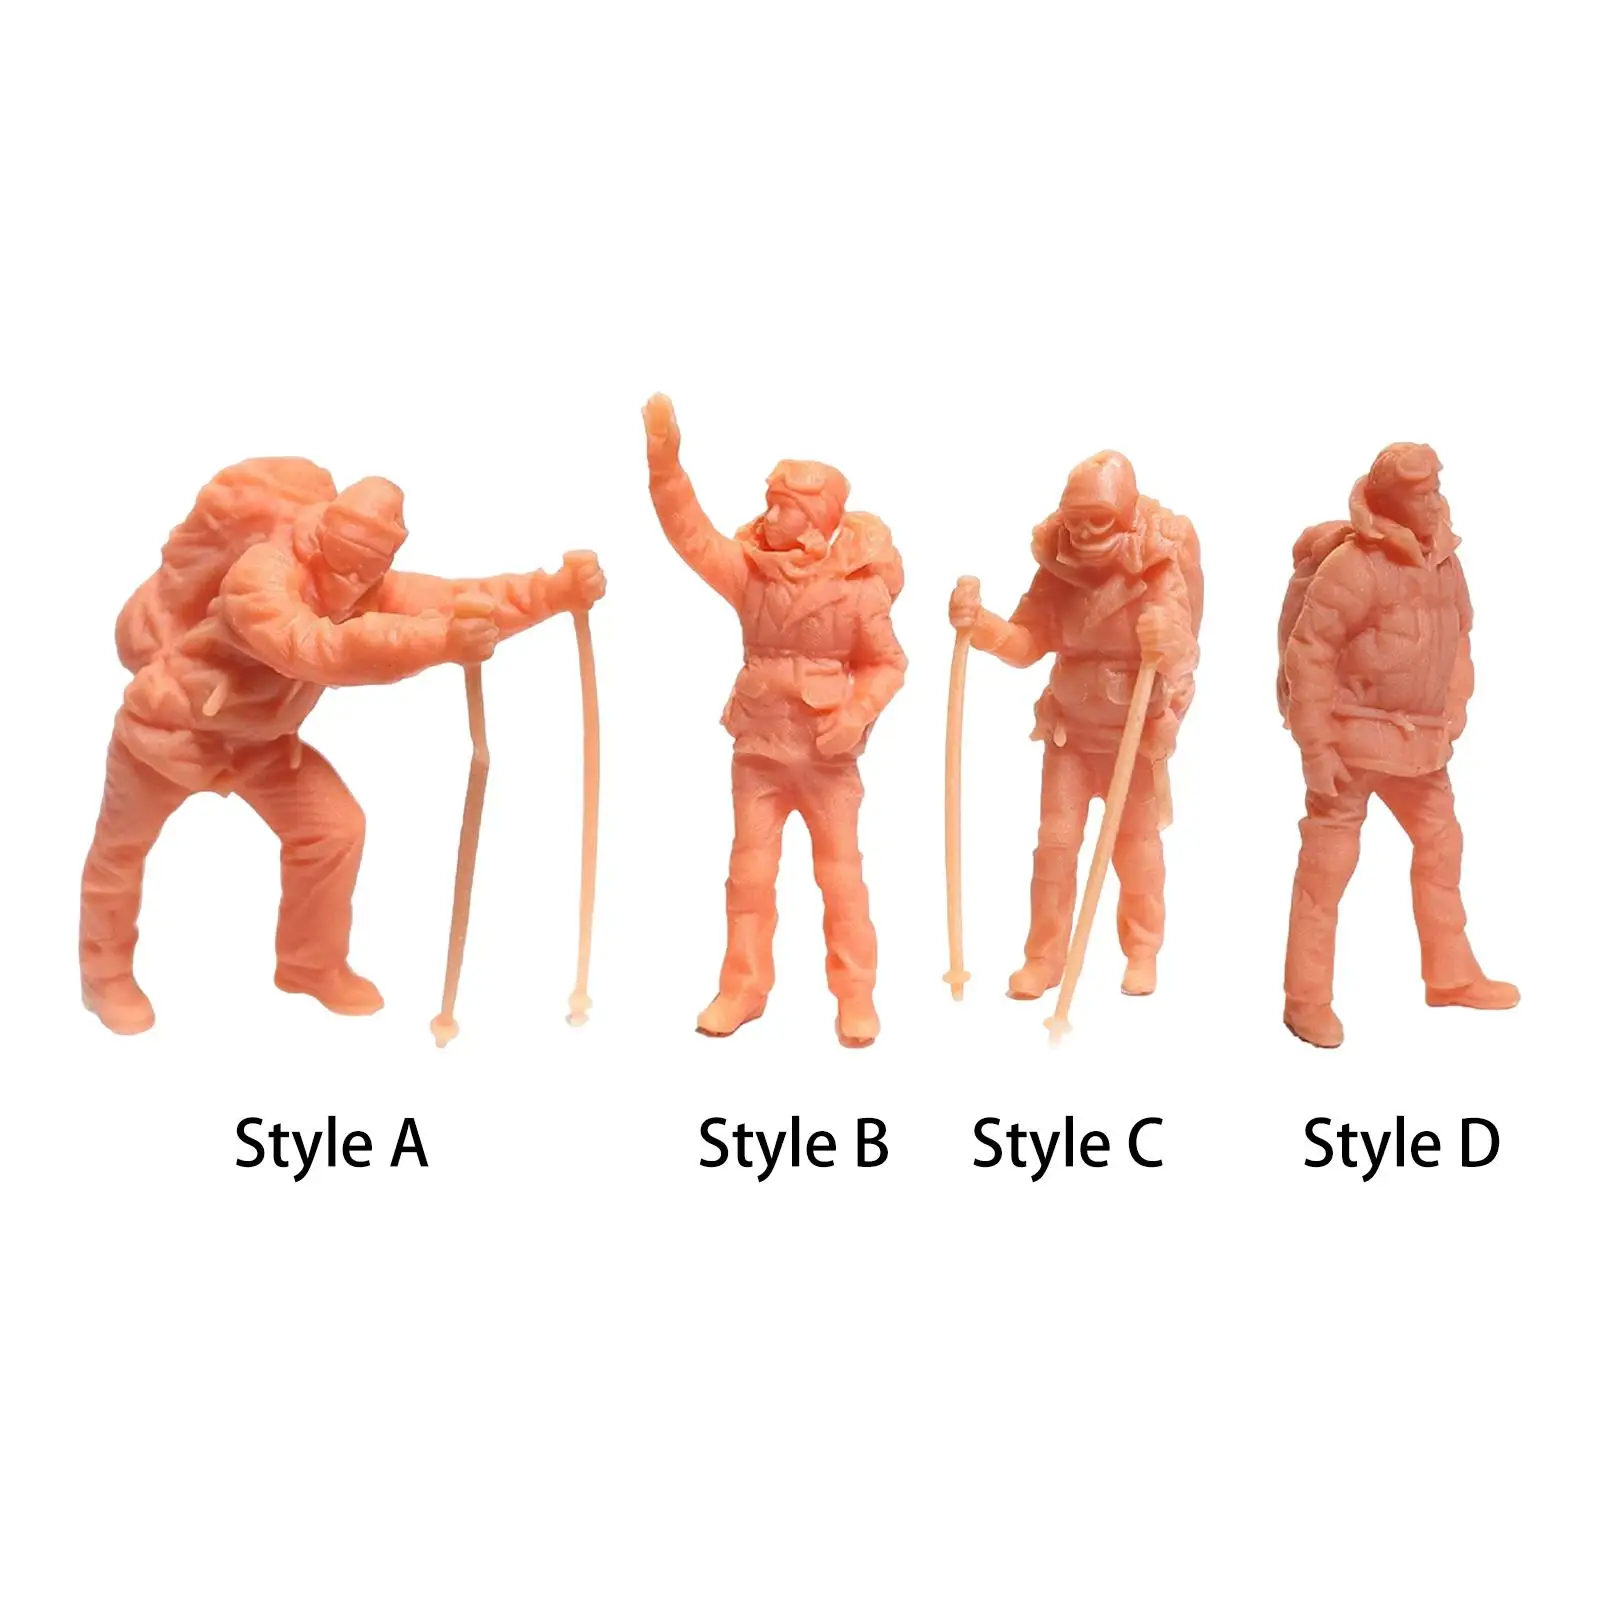 People Figurines 1/64 Unpainted Figures Miniature for Fairy Garden Architectural Layout Project Trains Decoration Collectibles